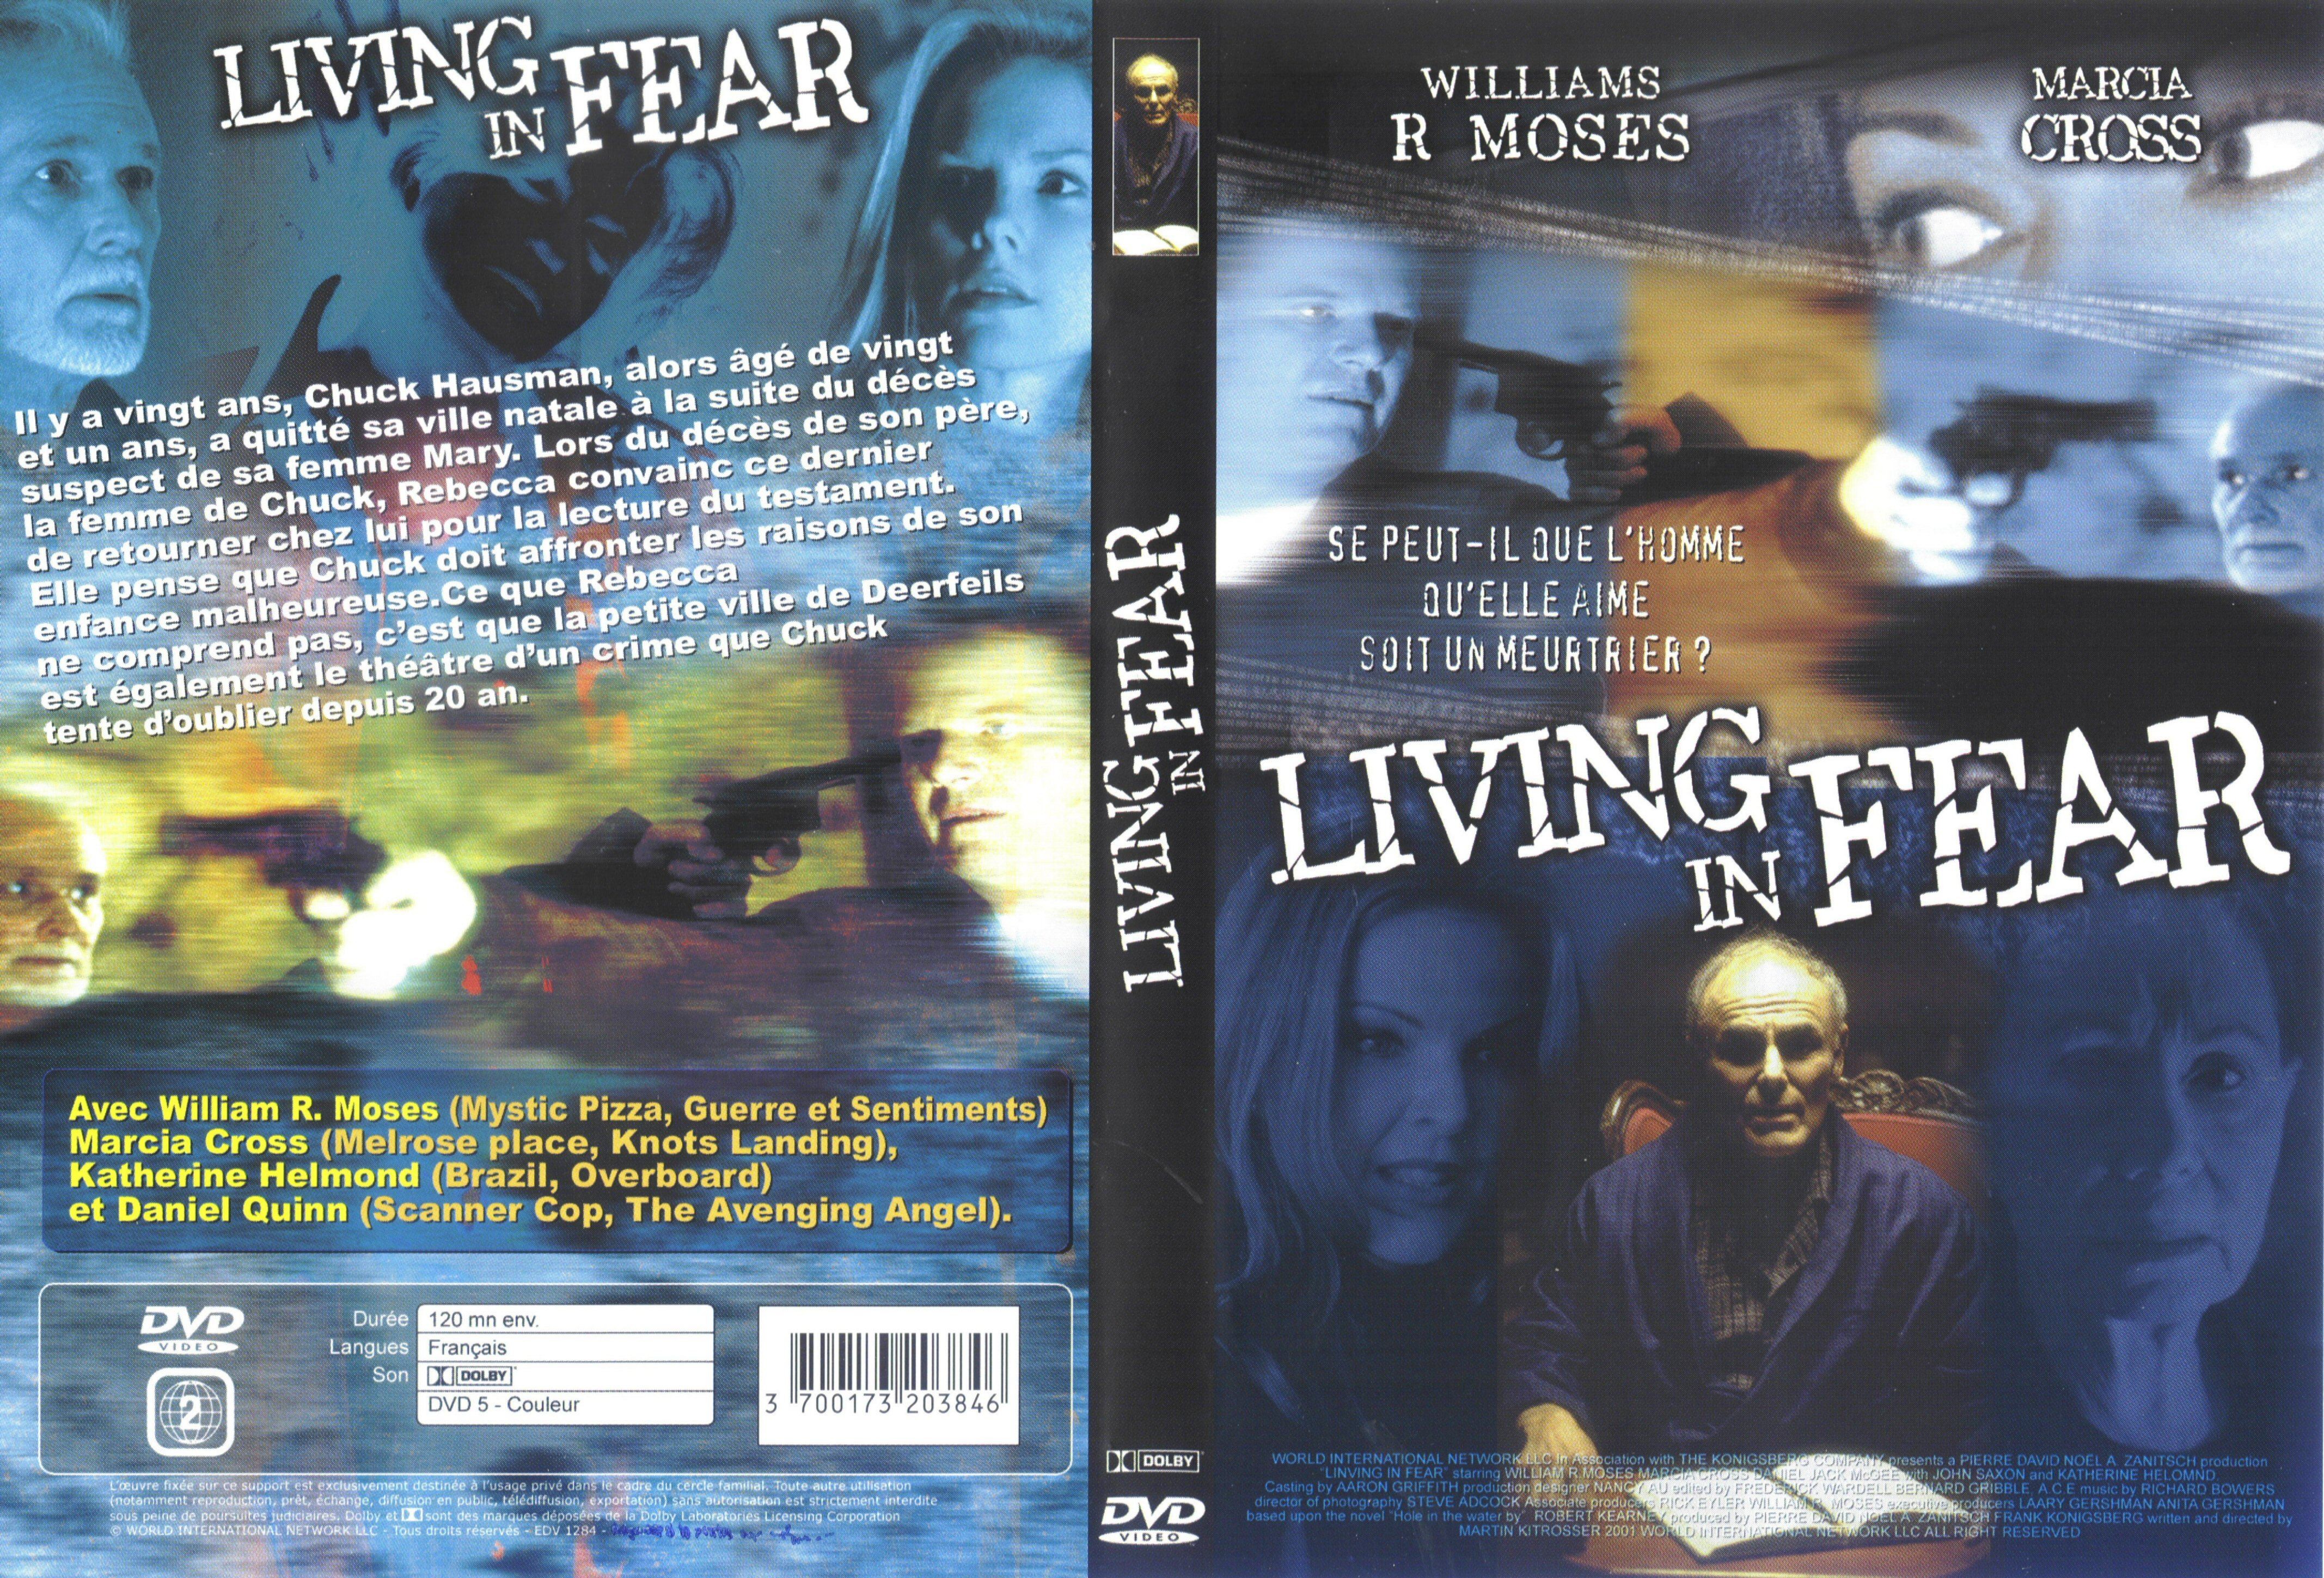 Jaquette DVD Living in fear